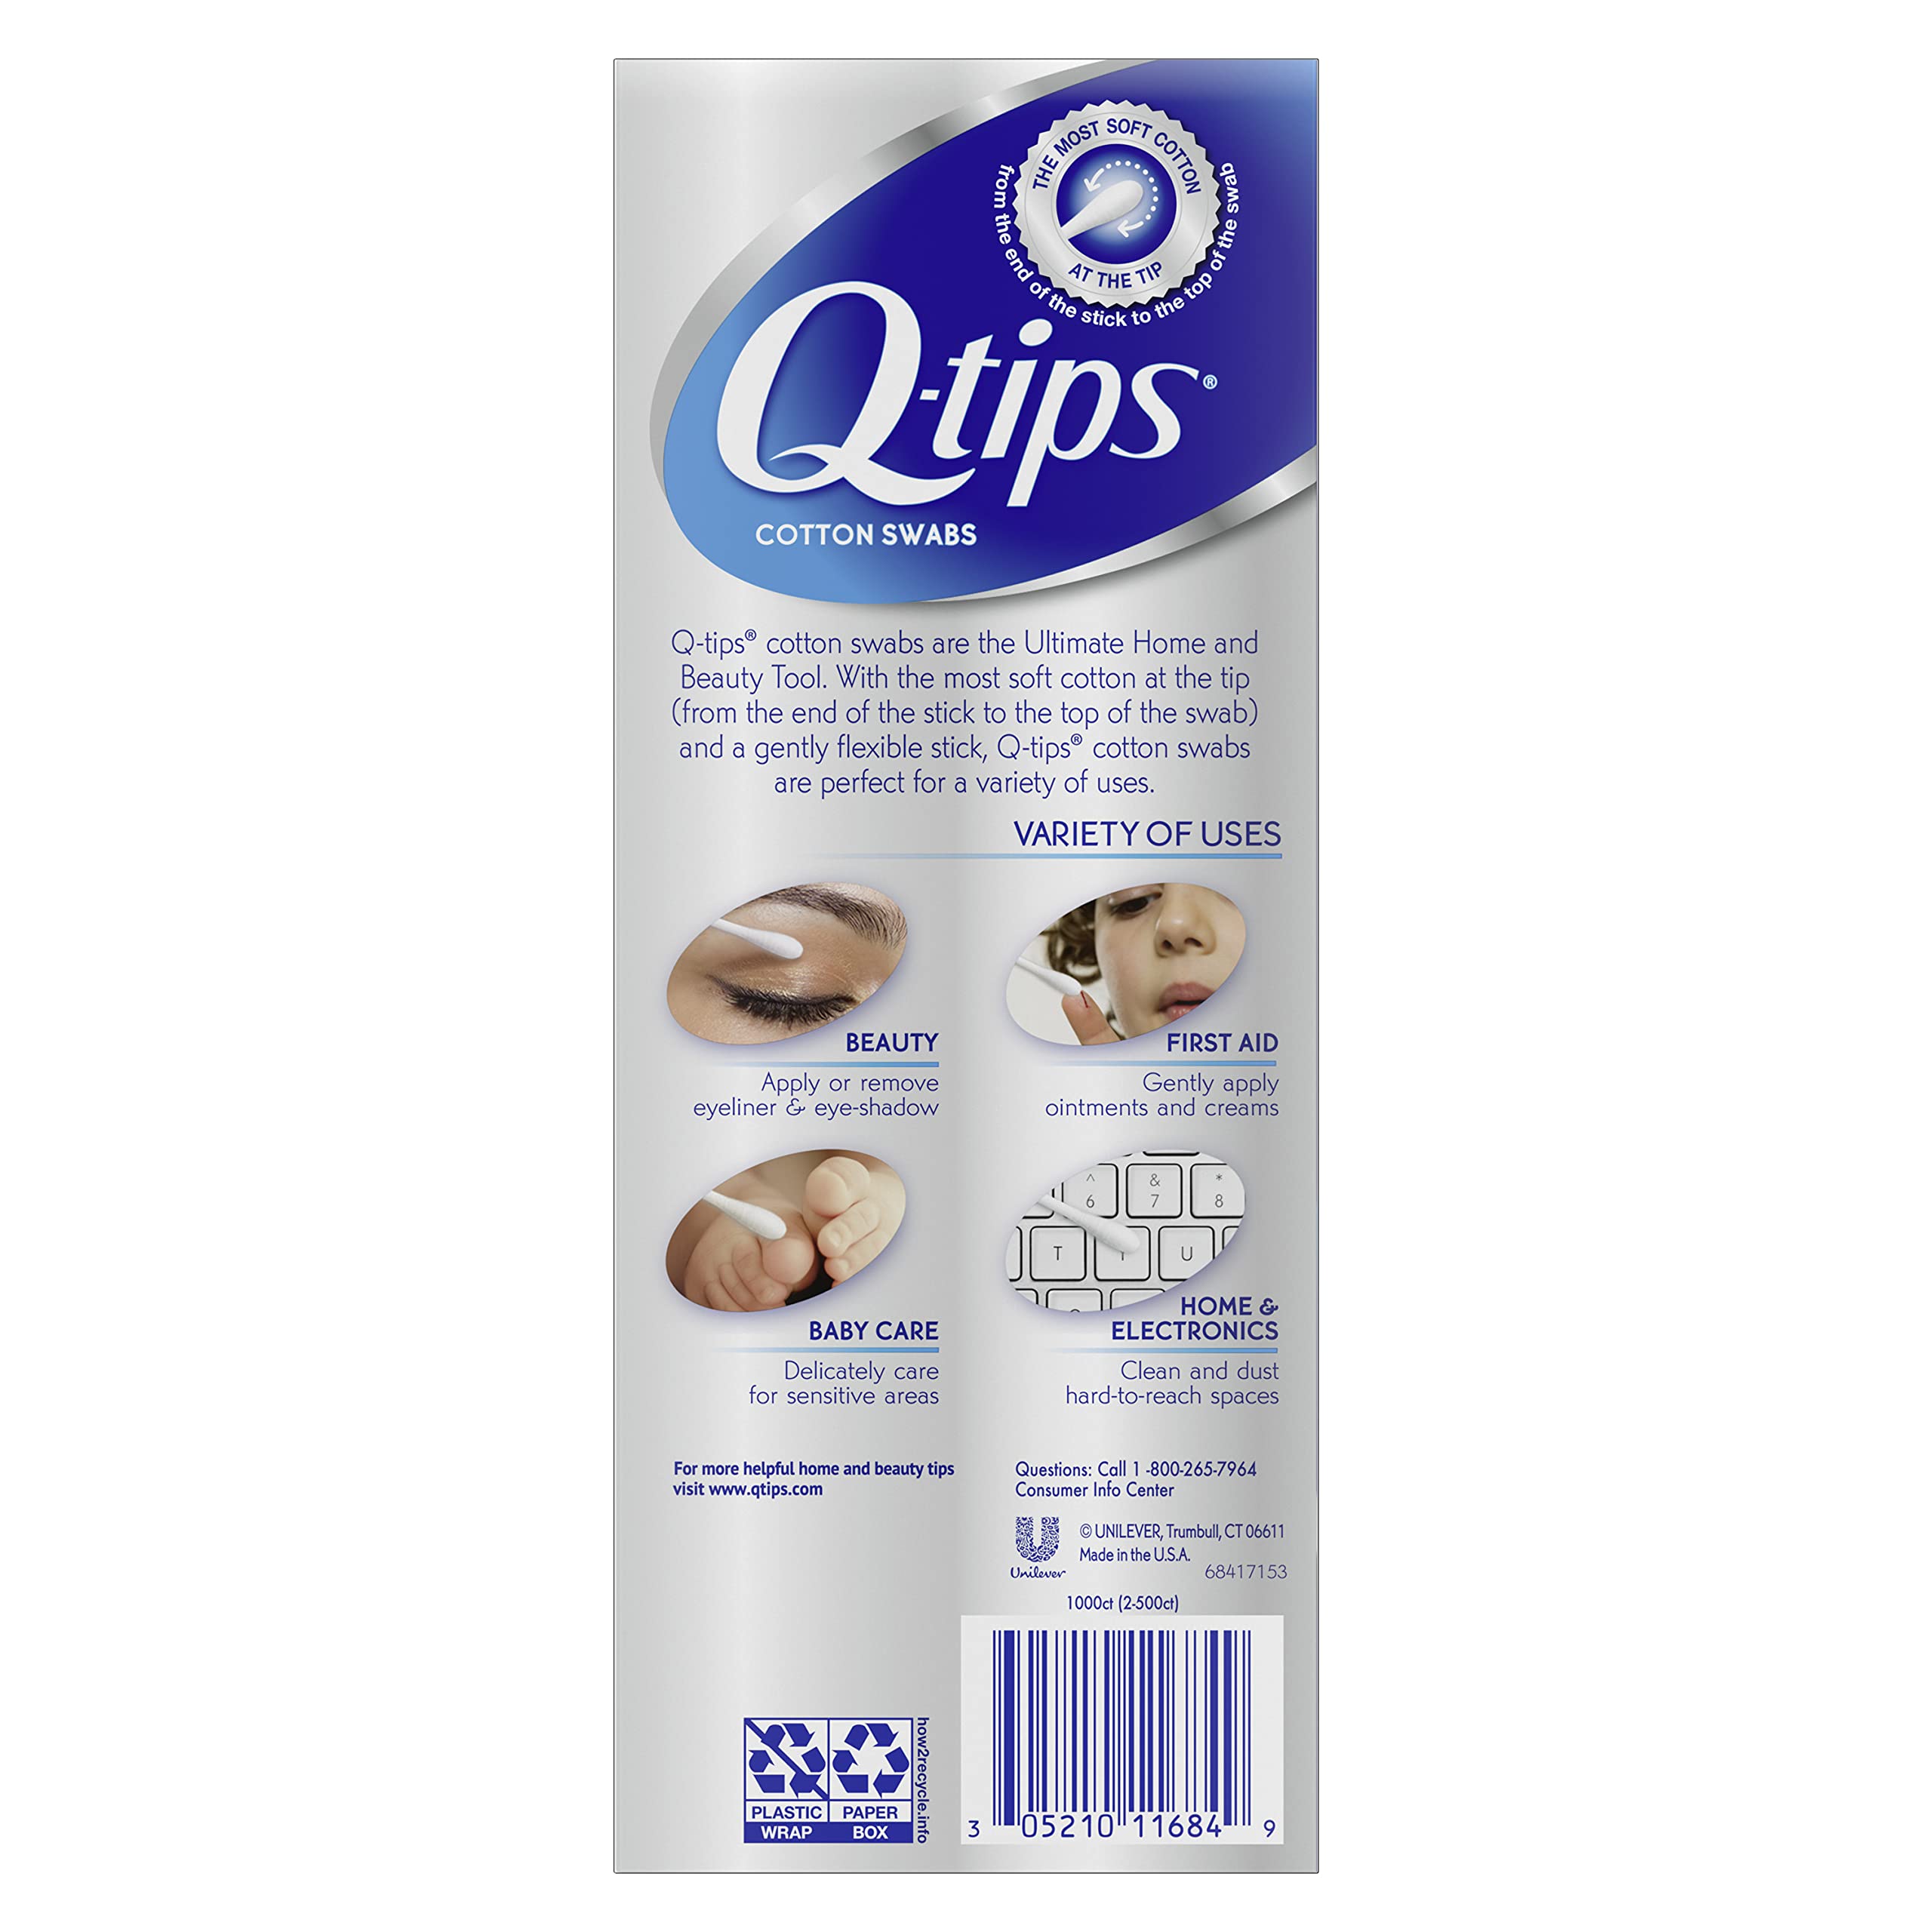 Q-tips Antimicrobial Swabs for Cleaning are Made with 100 Percent Cotton, 300 Count, Pack of 12